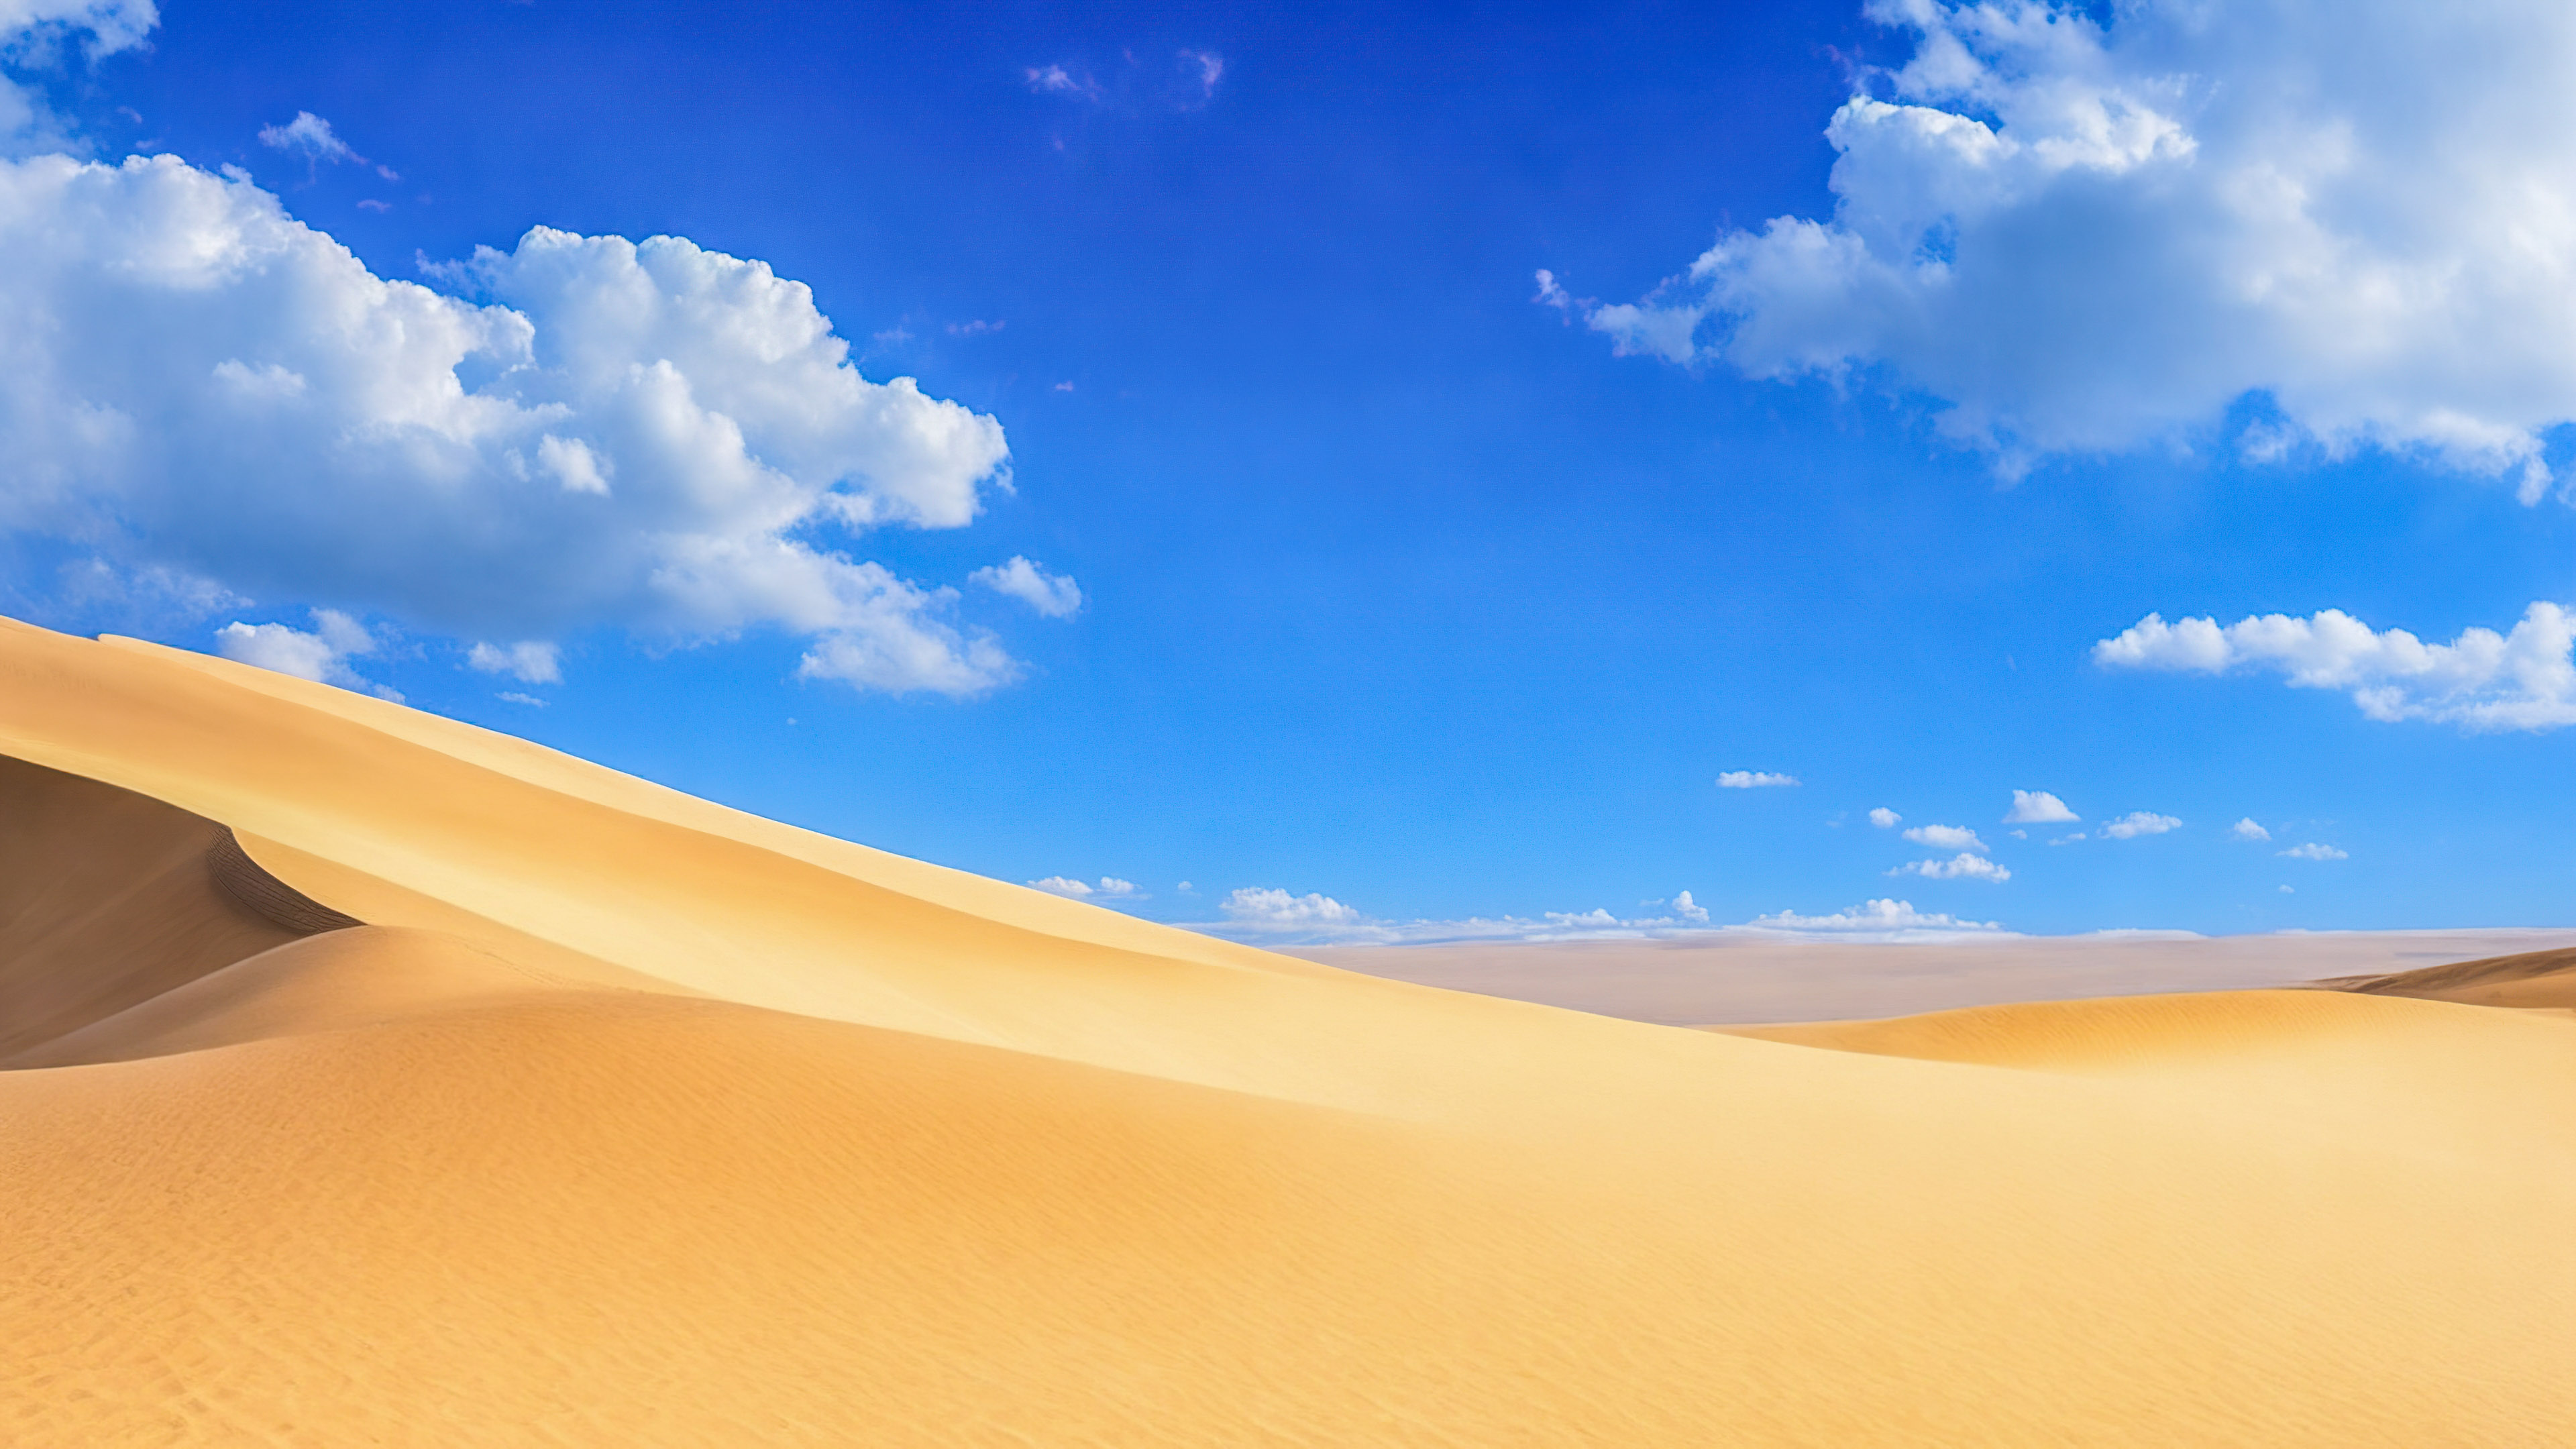 Download the serenity of our beauty nature wallpaper, presenting a serene desert landscape with sand dunes stretching to the horizon under a vast, blue sky.